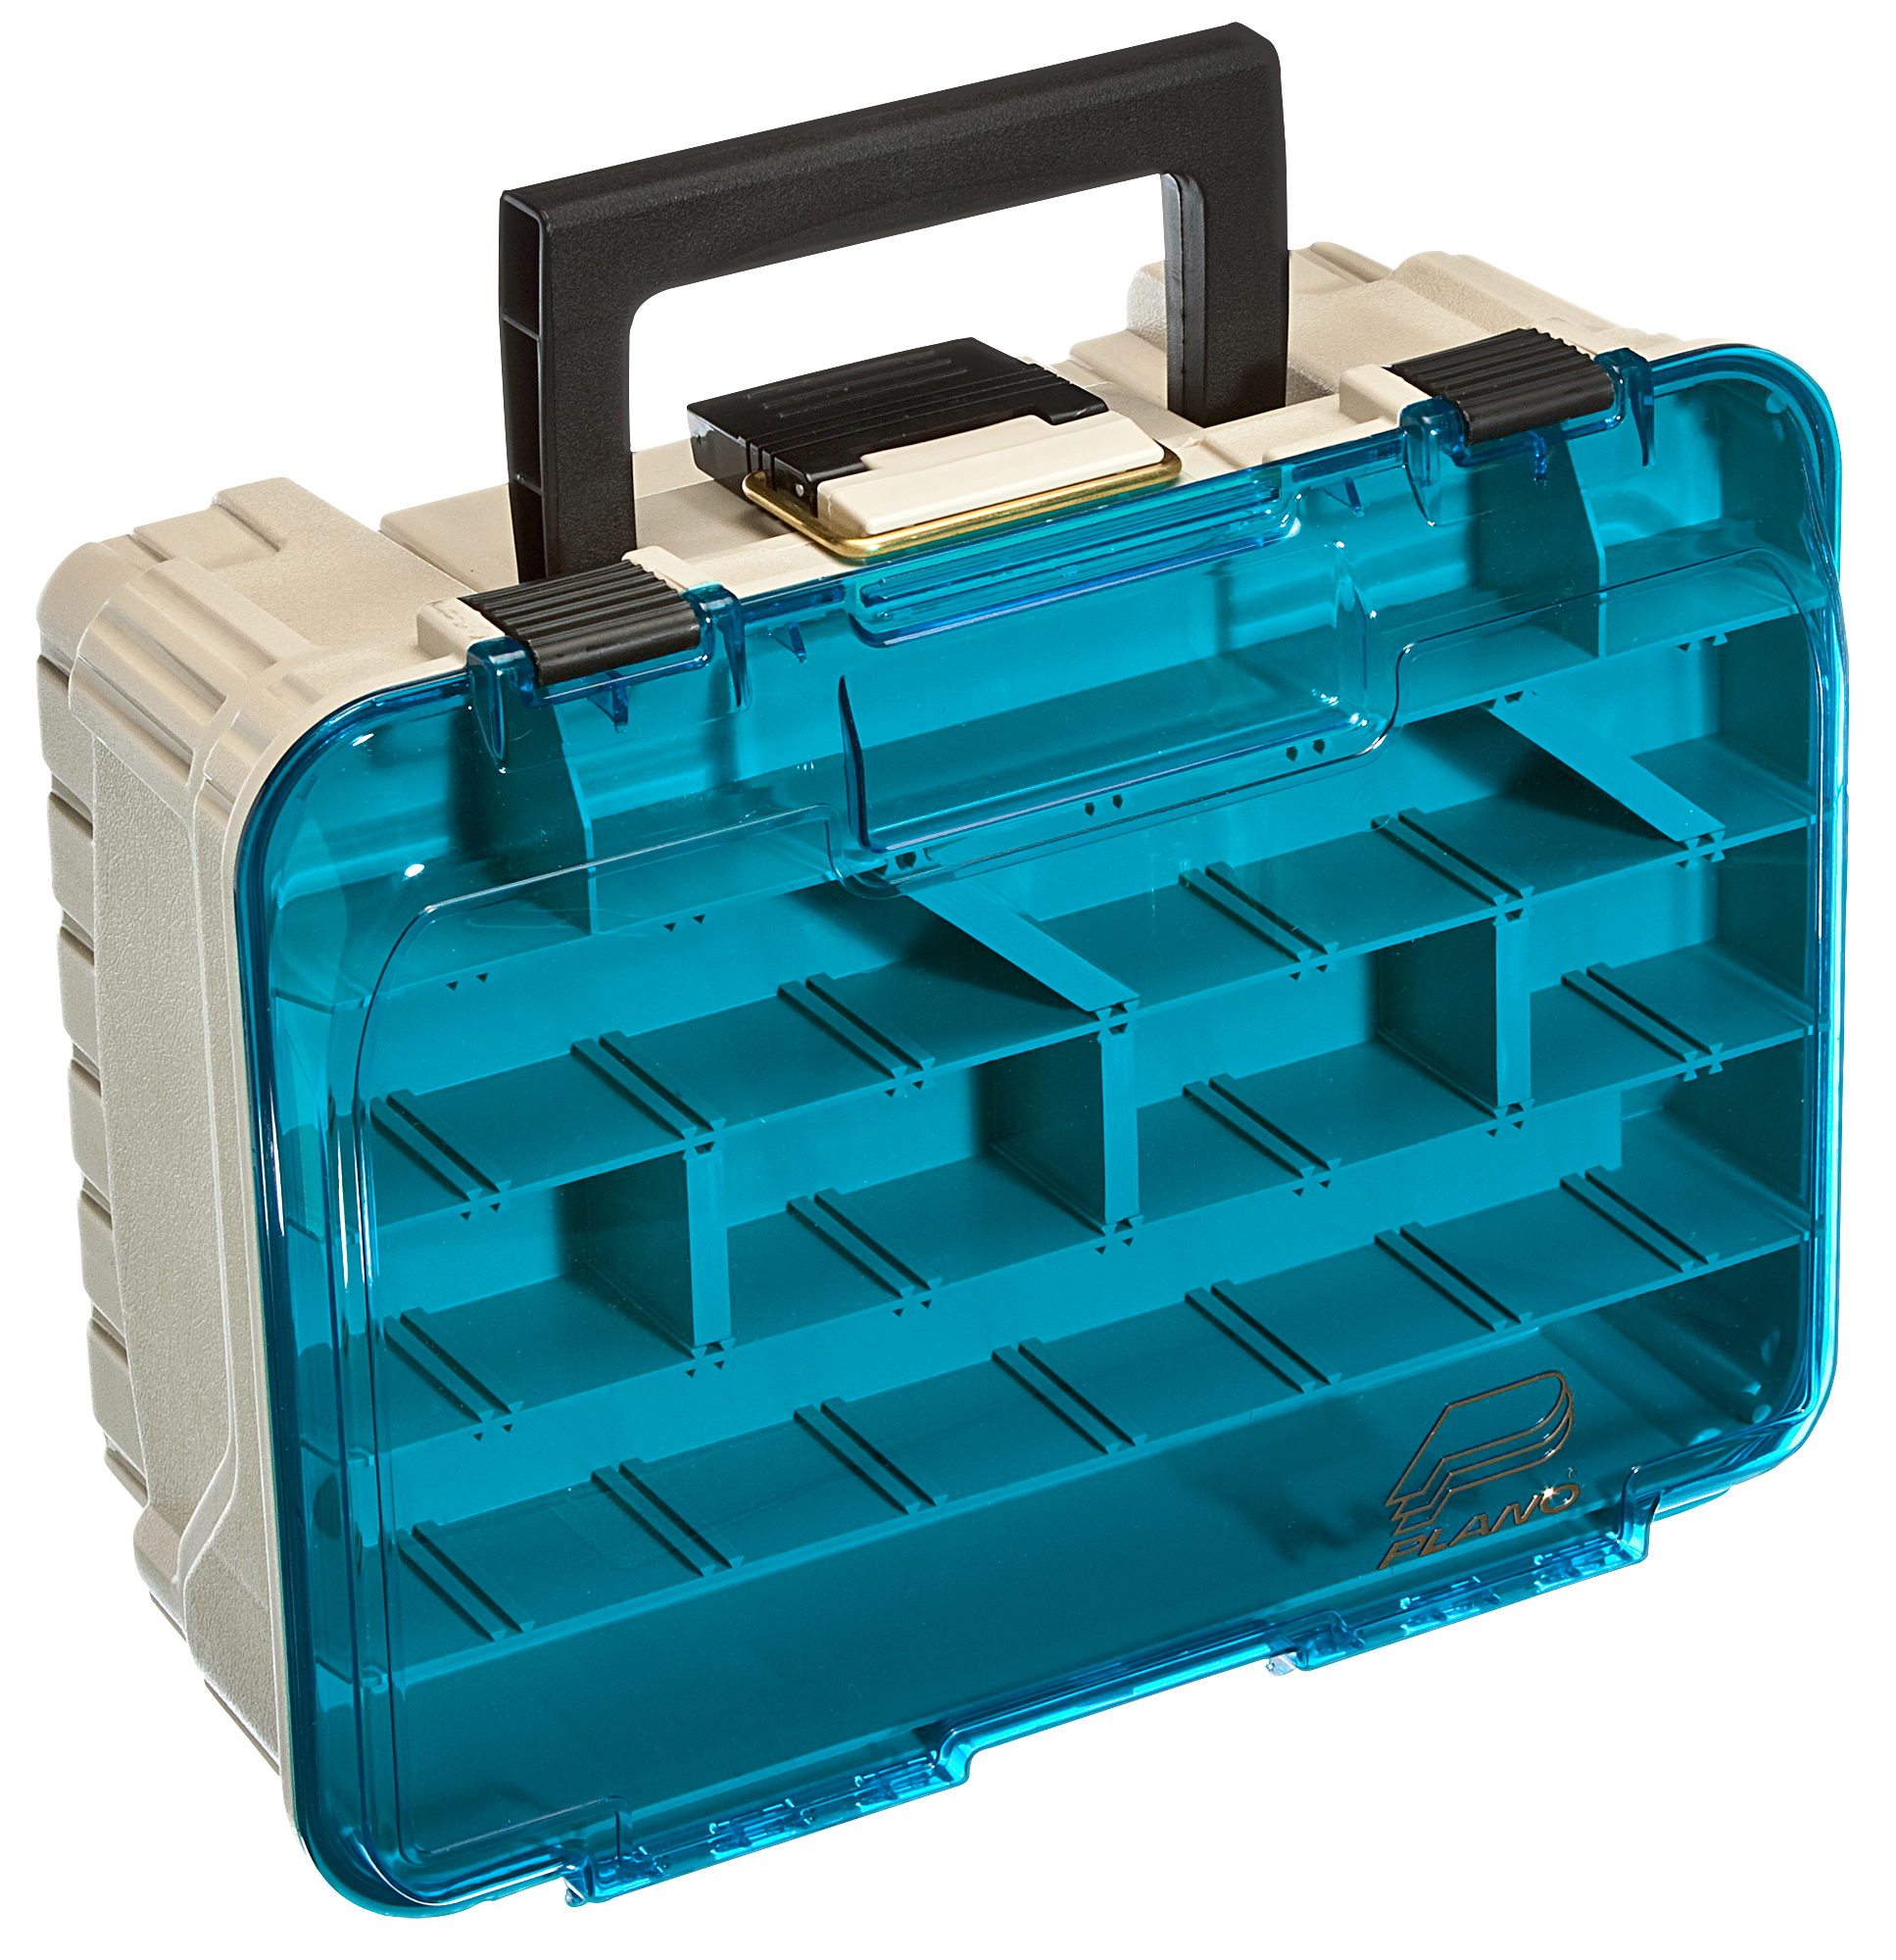  Plano 1349-00 Two Level Magnum 3449 Tackle Box